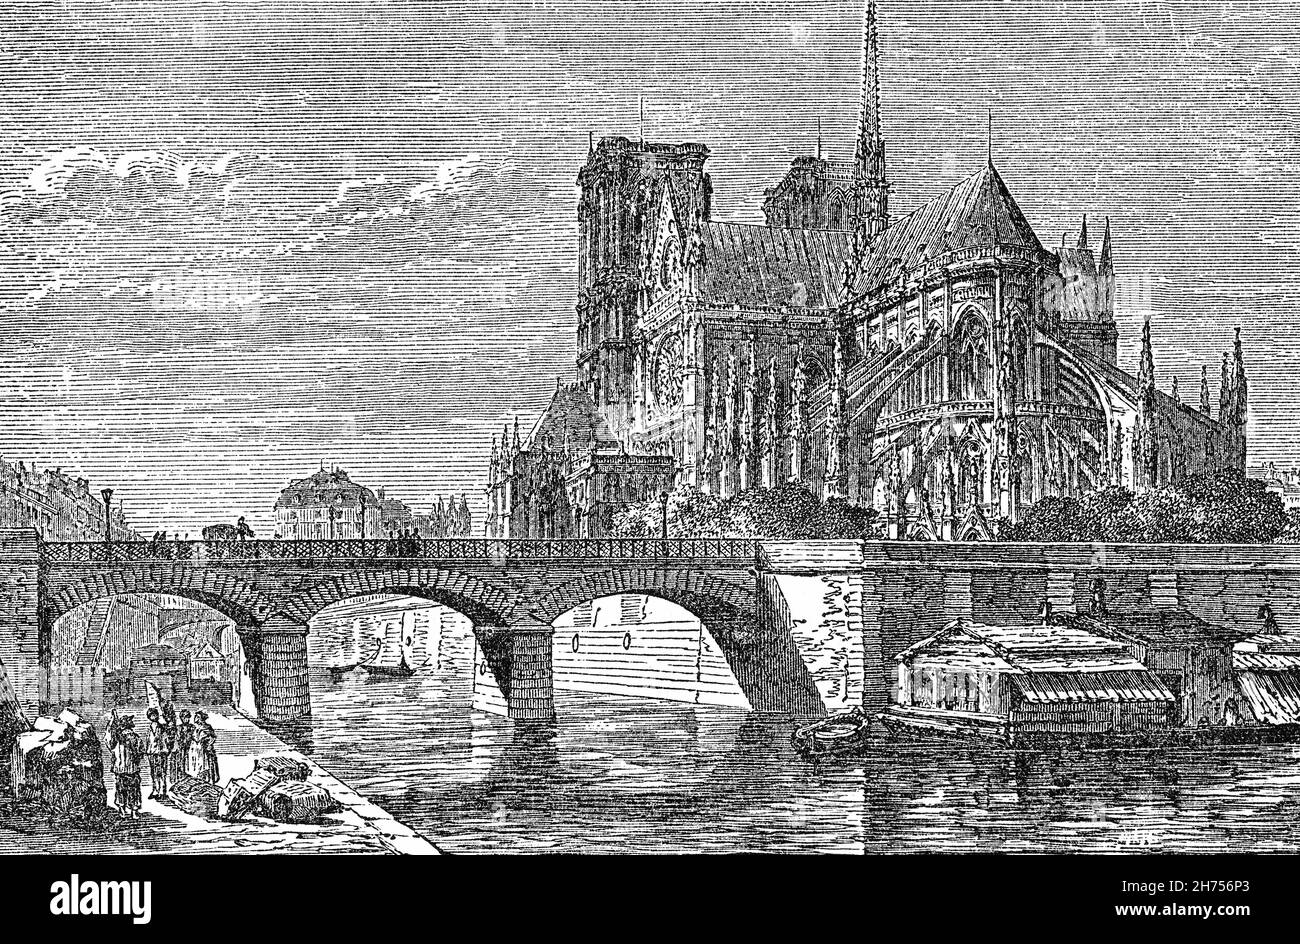 A late 19th Century illustration of Notre-Dame de Paris aka "Our Lady of Paris", a medieval Catholic cathedral on the Île de la Cité in the 4th arrondissement of Paris. The cathedral, seen here from the Archbishop's Bridge across the Seine, was consecrated to the Virgin Mary and is considered to be one of the finest examples of French Gothic architecture. The cathedral's construction began in 1163 under Bishop Maurice de Sully and was largely complete by 1260, though it was modified frequently in the following centuries. Stock Photo